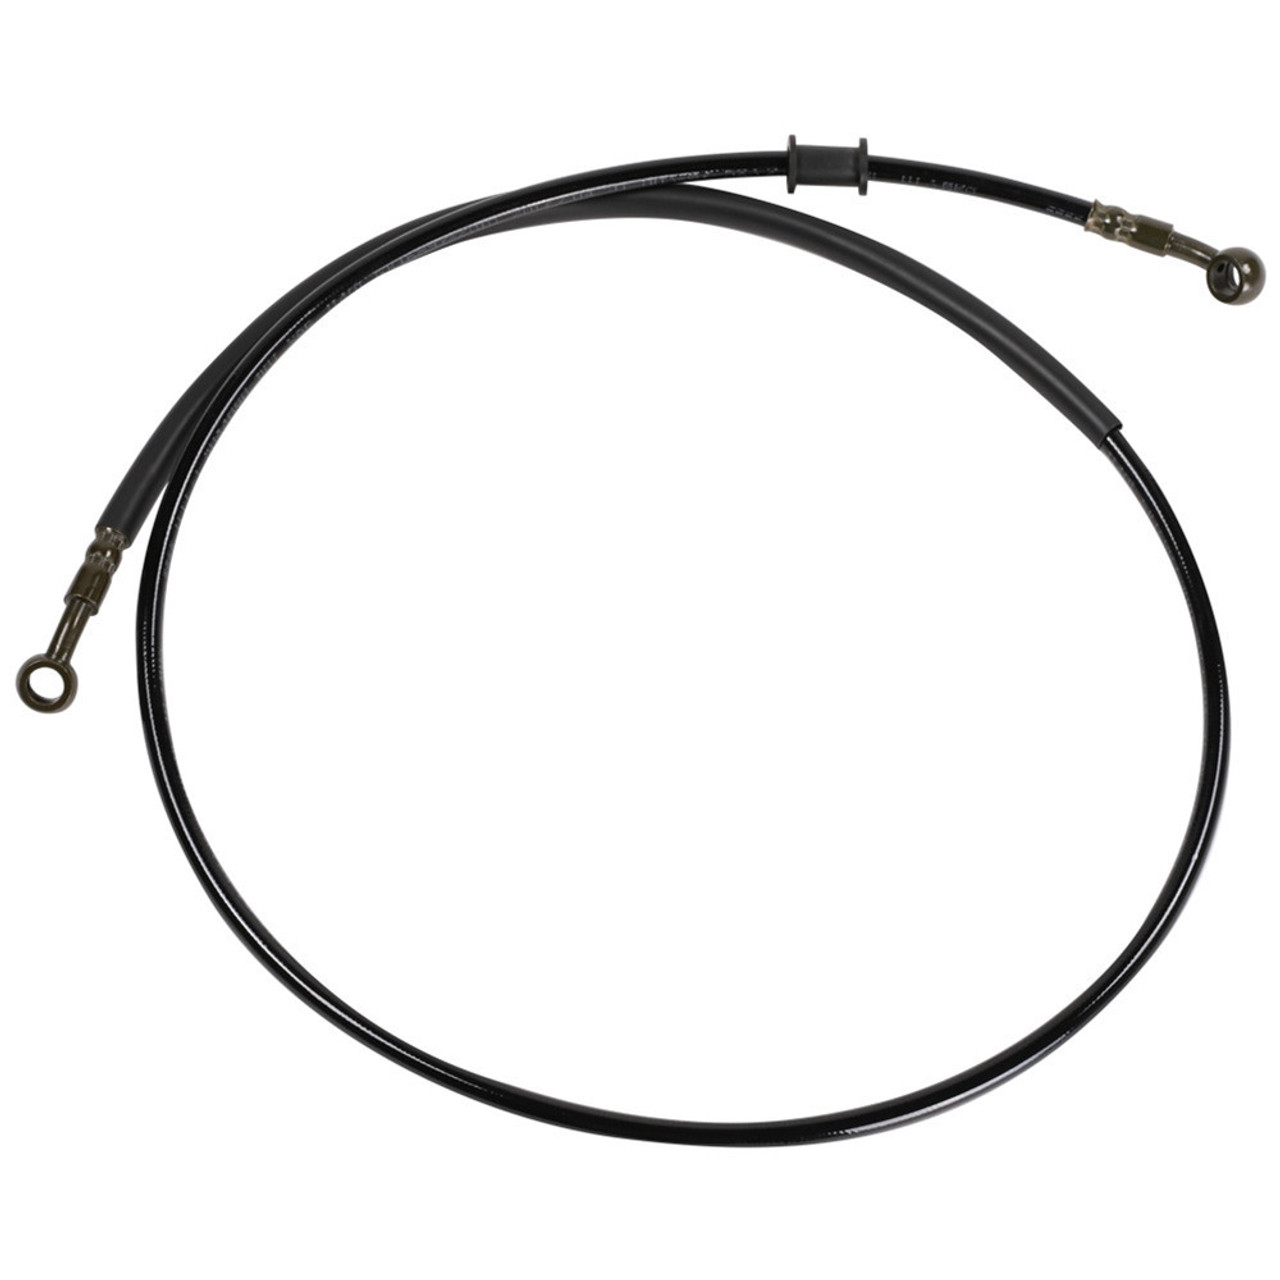 BRAKE HOSE LINE 44" FOR 150cc GY6 & 50cc QMB SCOOTERS WITH FRONT DISC BRAKES